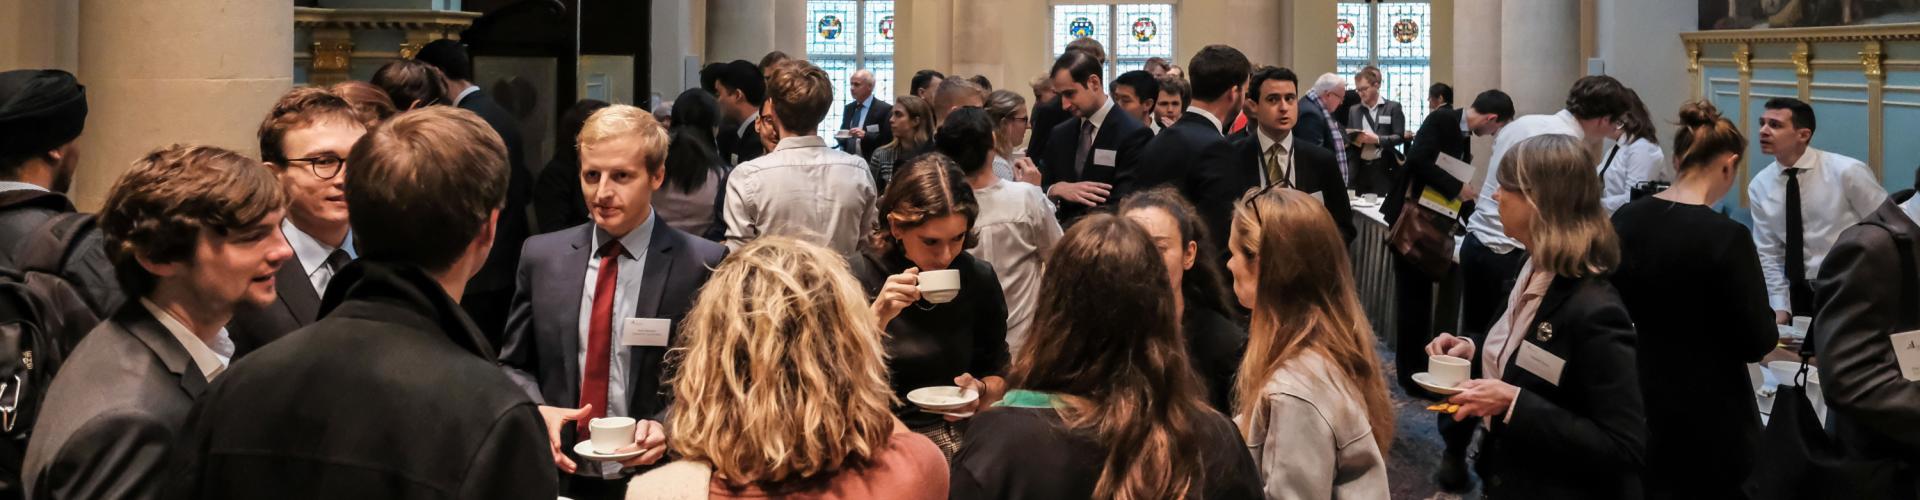 An image of people networking at an event